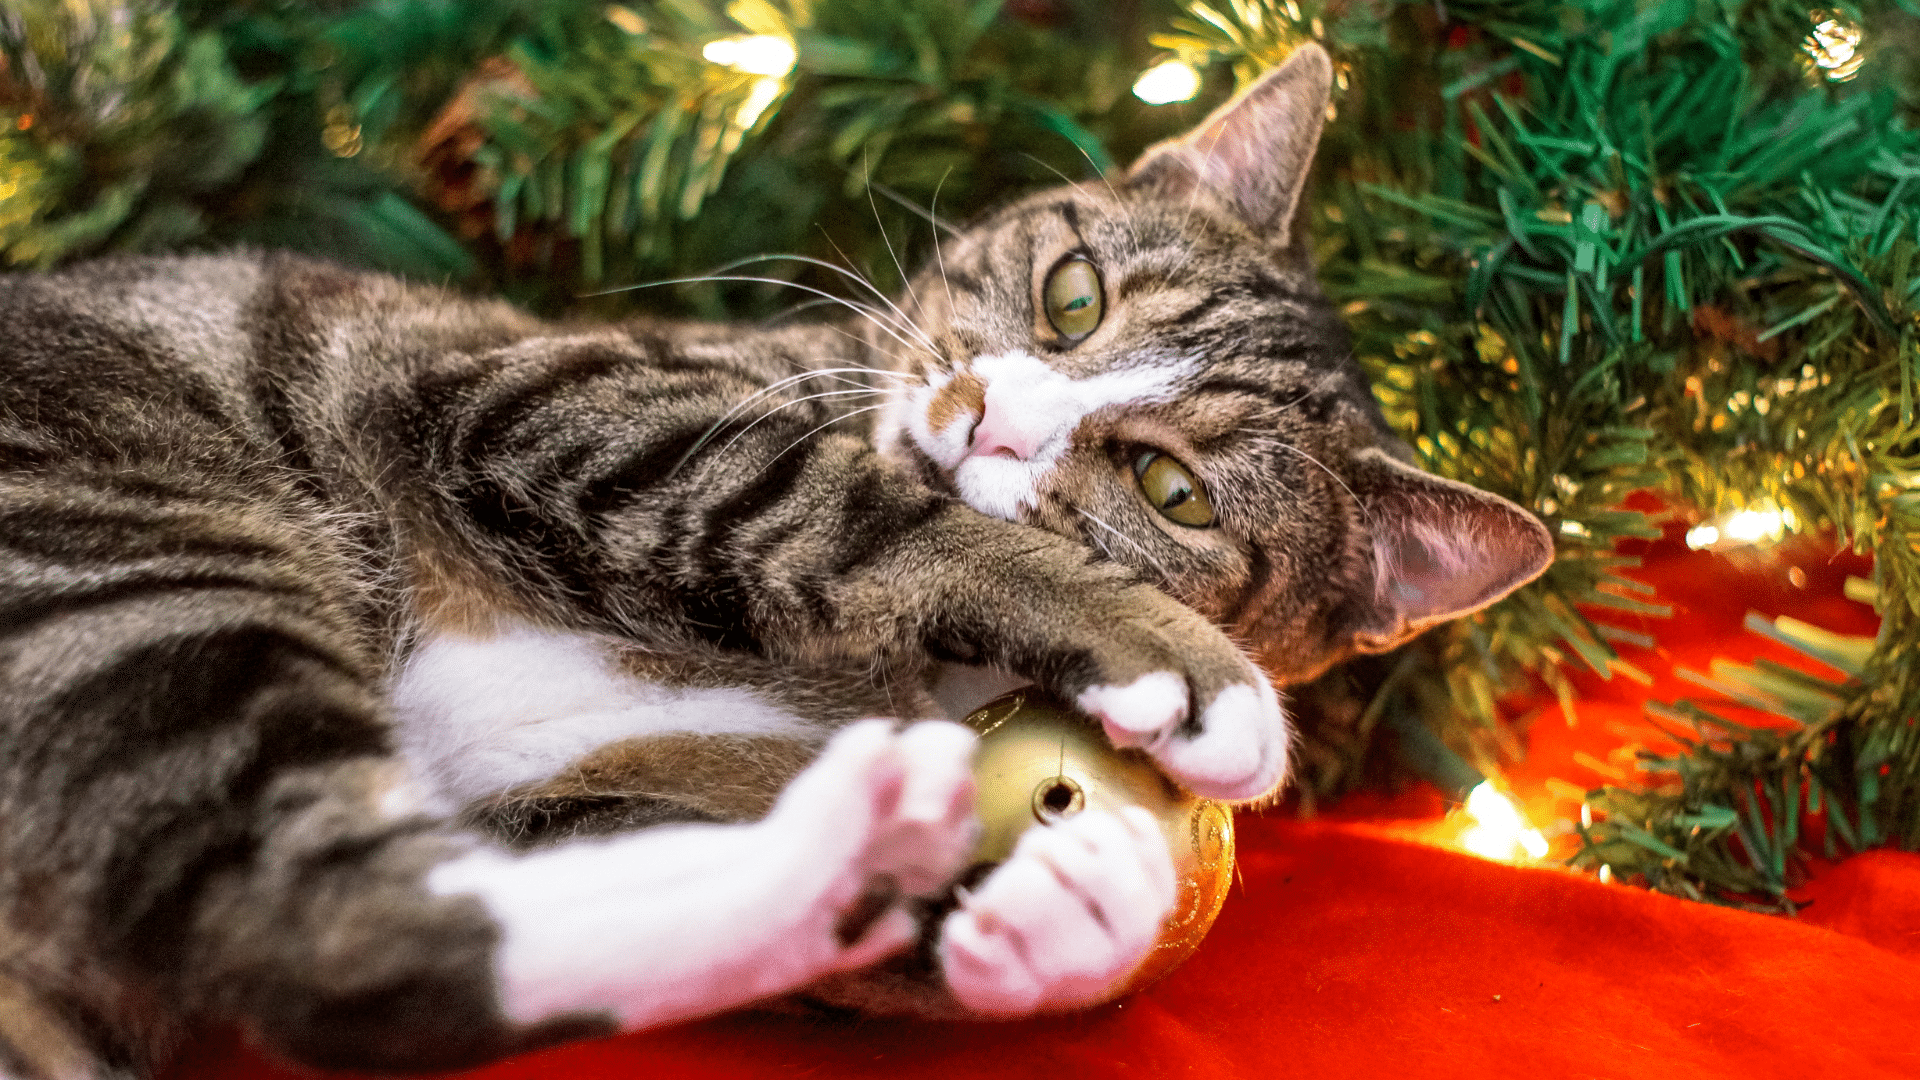 How to keep your cat out of the Christmas tree